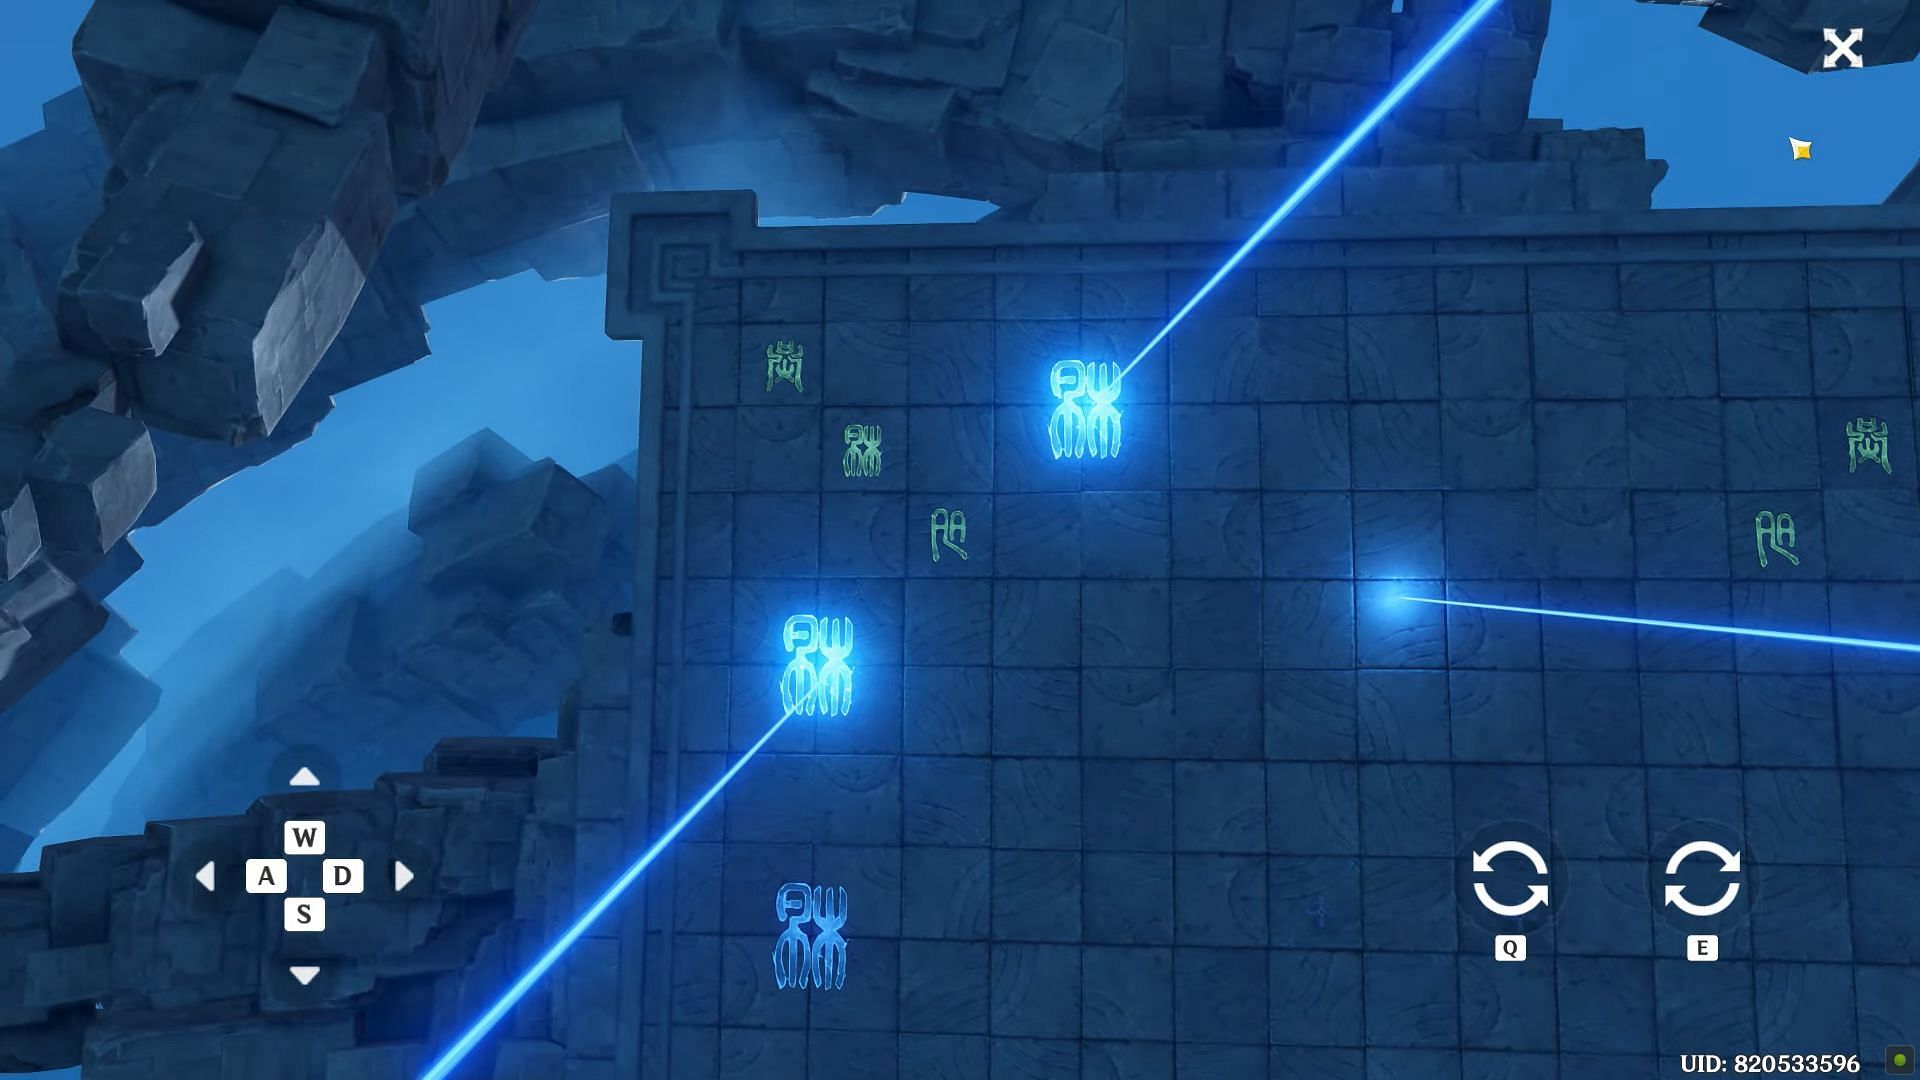 Position and rotate the light beam to activate all symbols (Image via Genshin Impact)